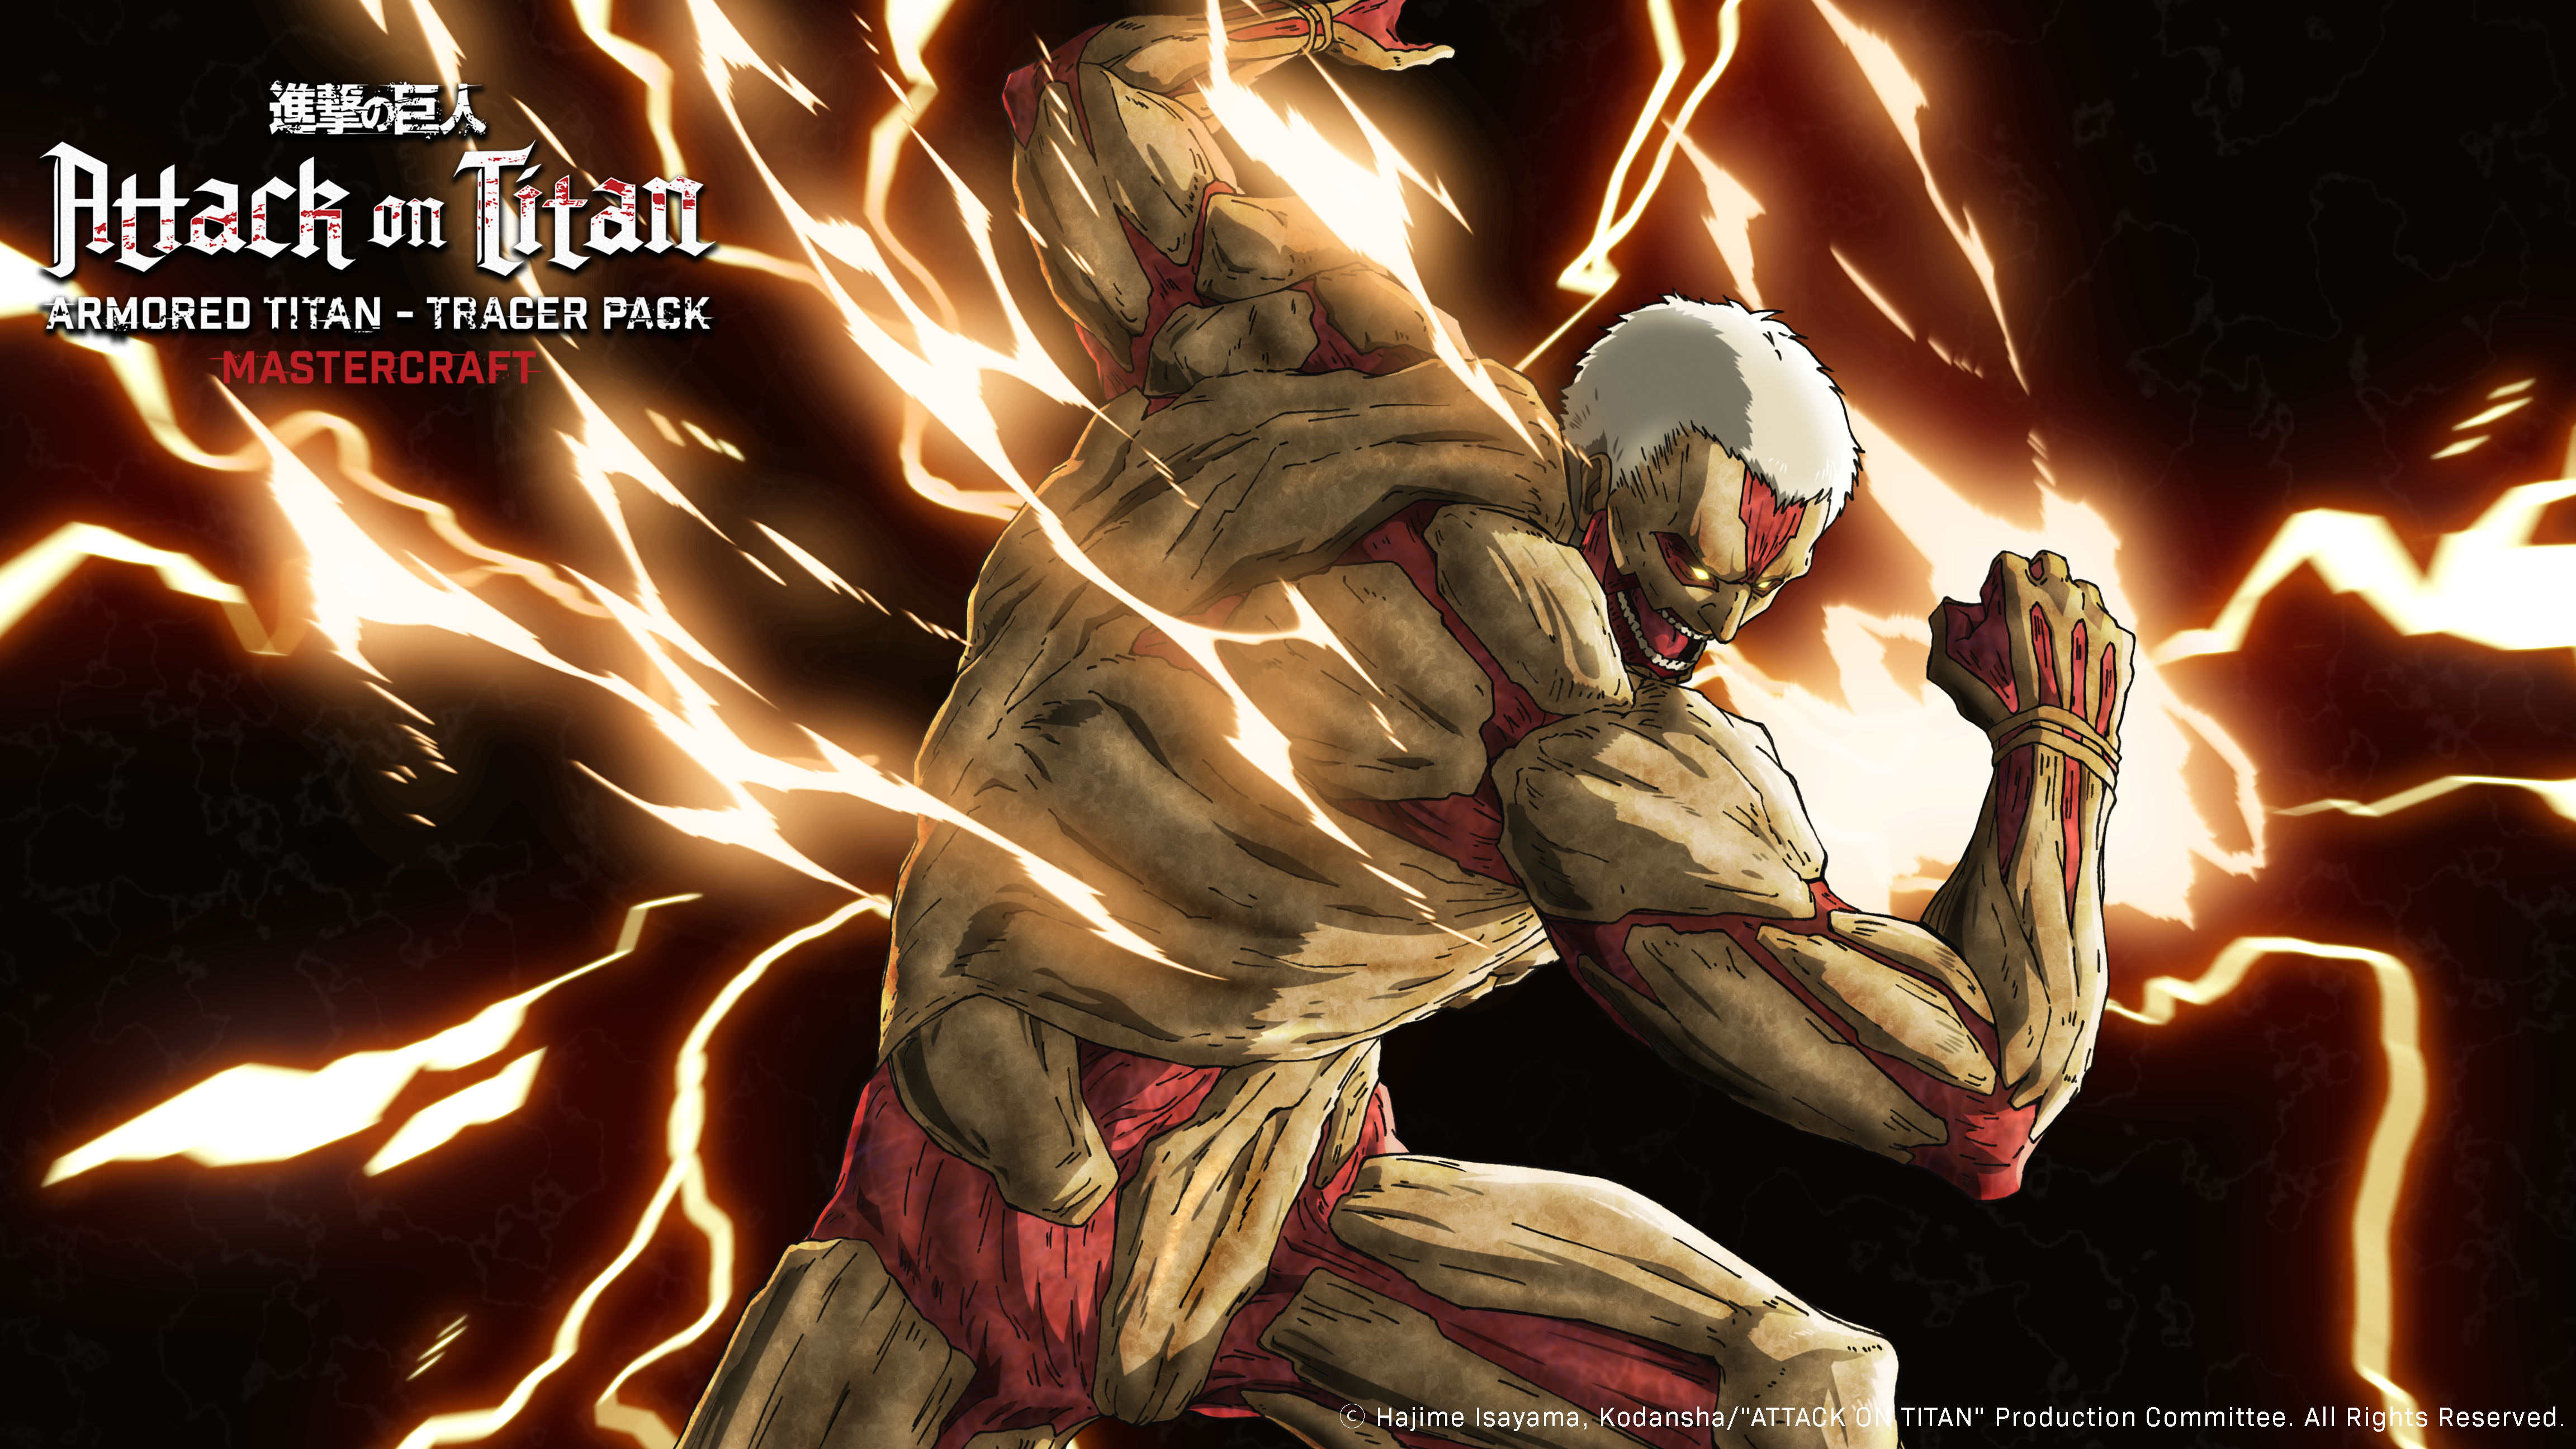 Attack on Titan Armored Titan Mastercraft Bundle hits Vanguard and Warzone Pacific today